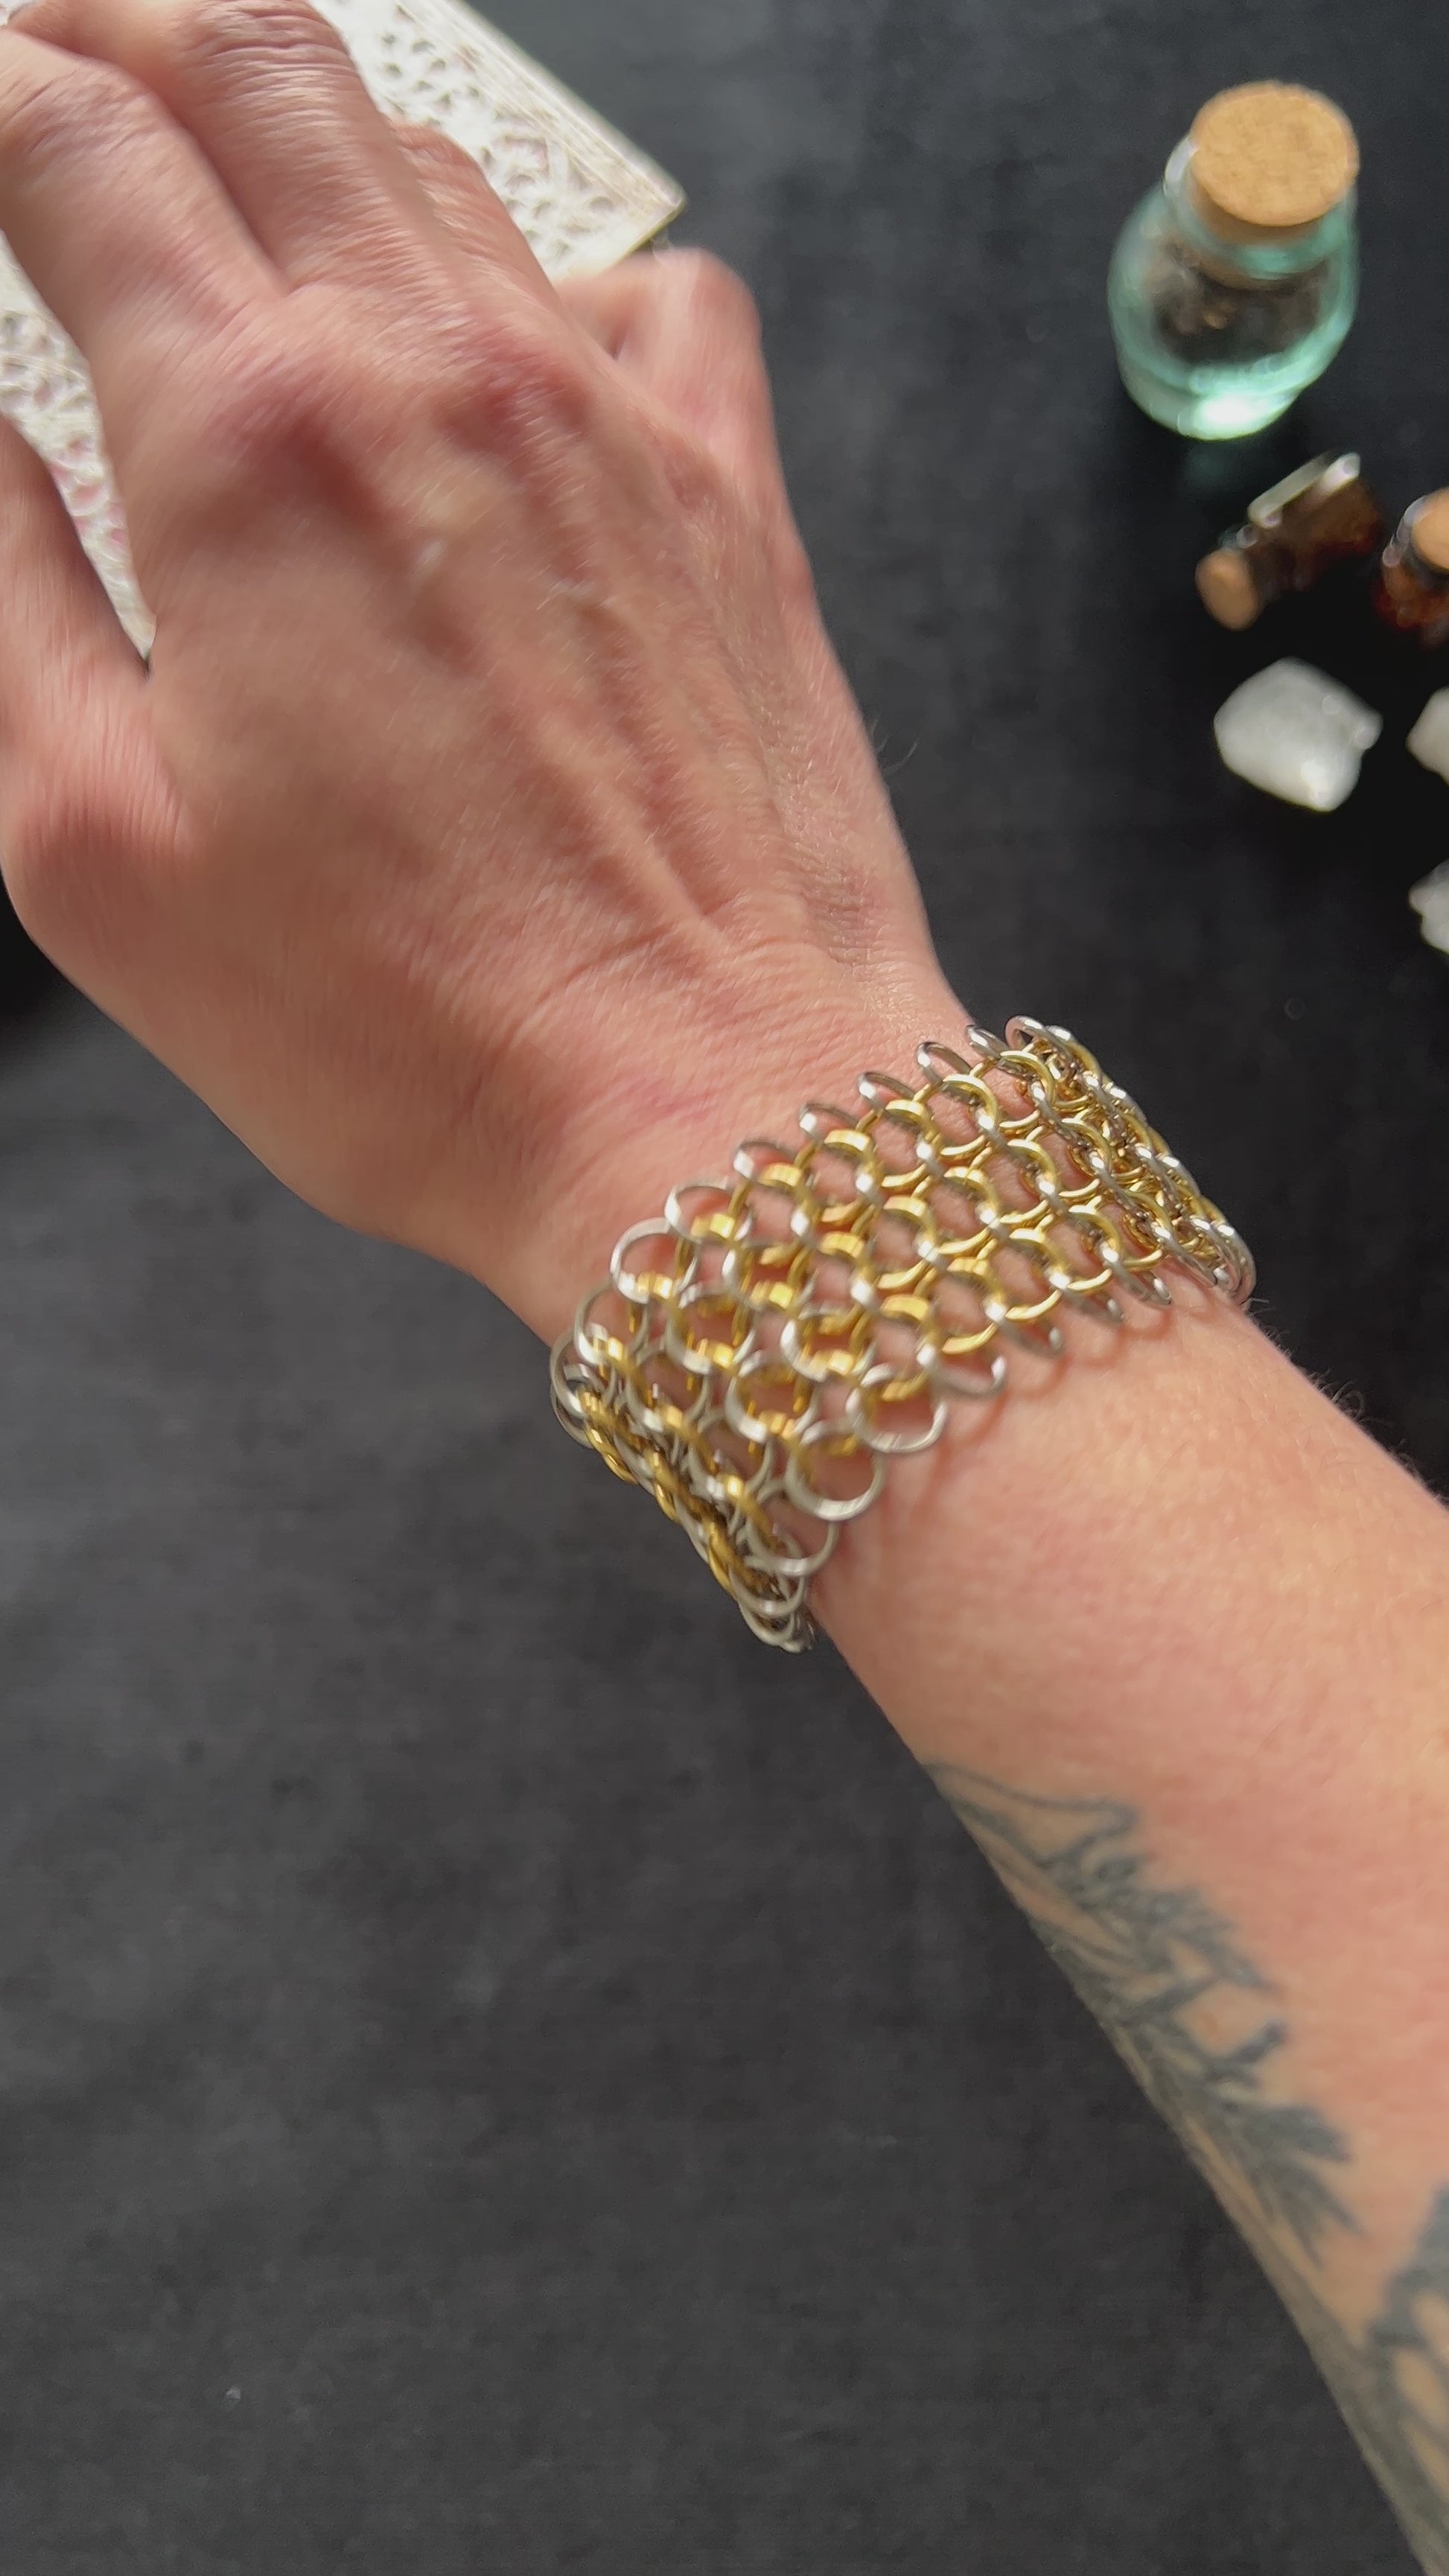 Chainmail bracelet made of stainless steel and 18k gold plated rings European 4 in 1 chainmaille cuff bracelet gothic jewelry